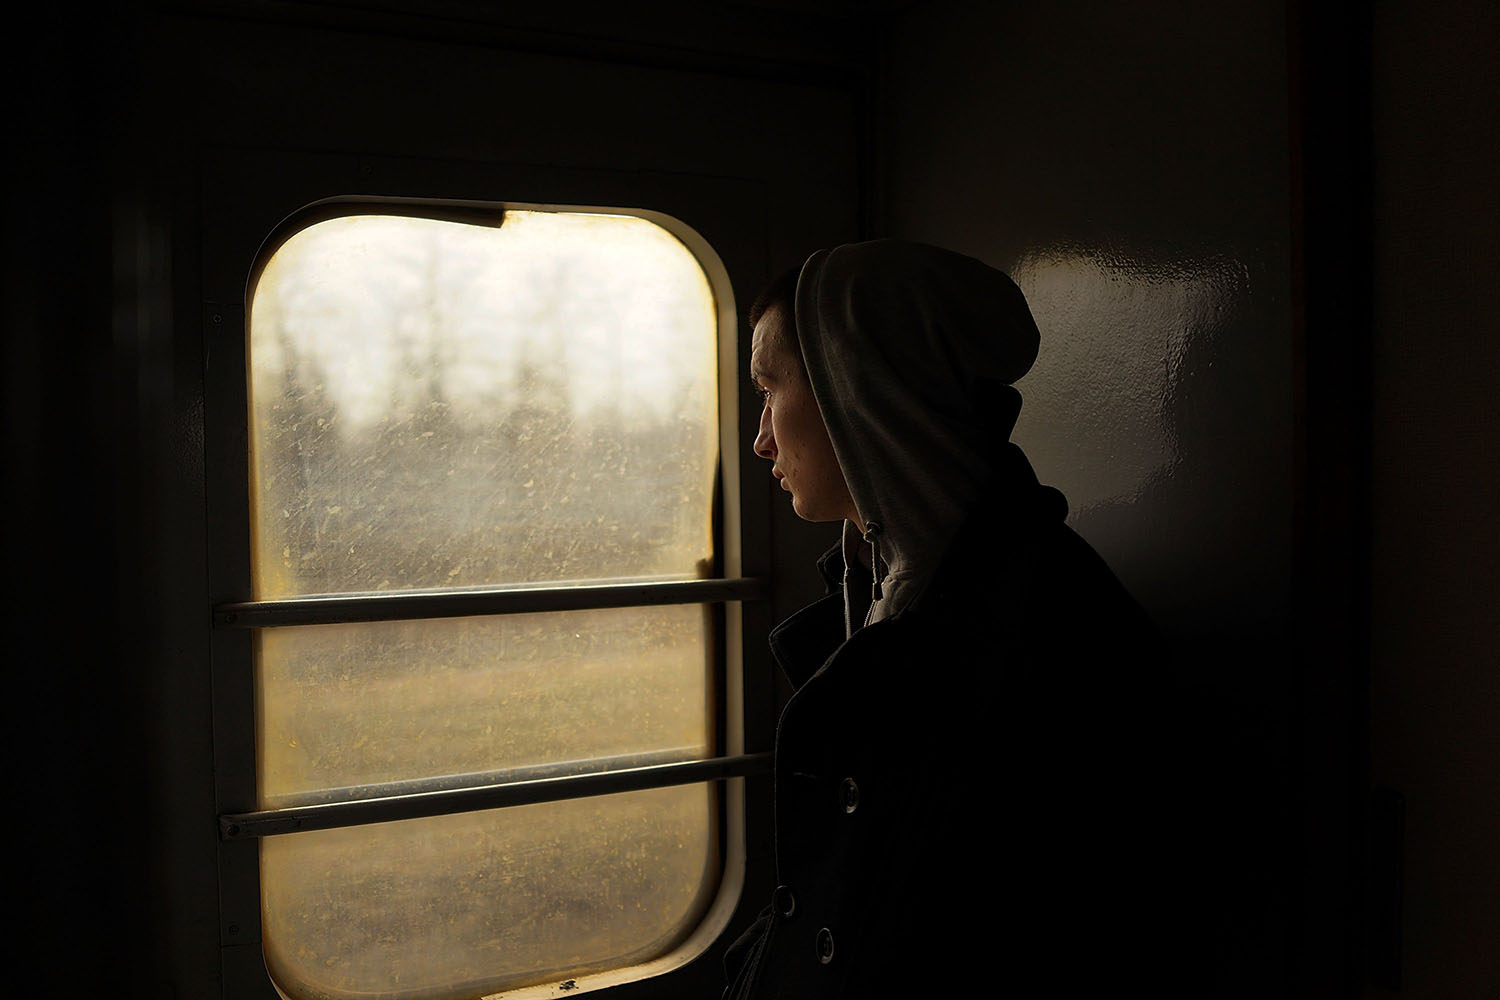 Mar. 4, 2014. A Ukrainian teen looks out at the countryside from a train on the outskirts of the Crimean city of Simferopol.